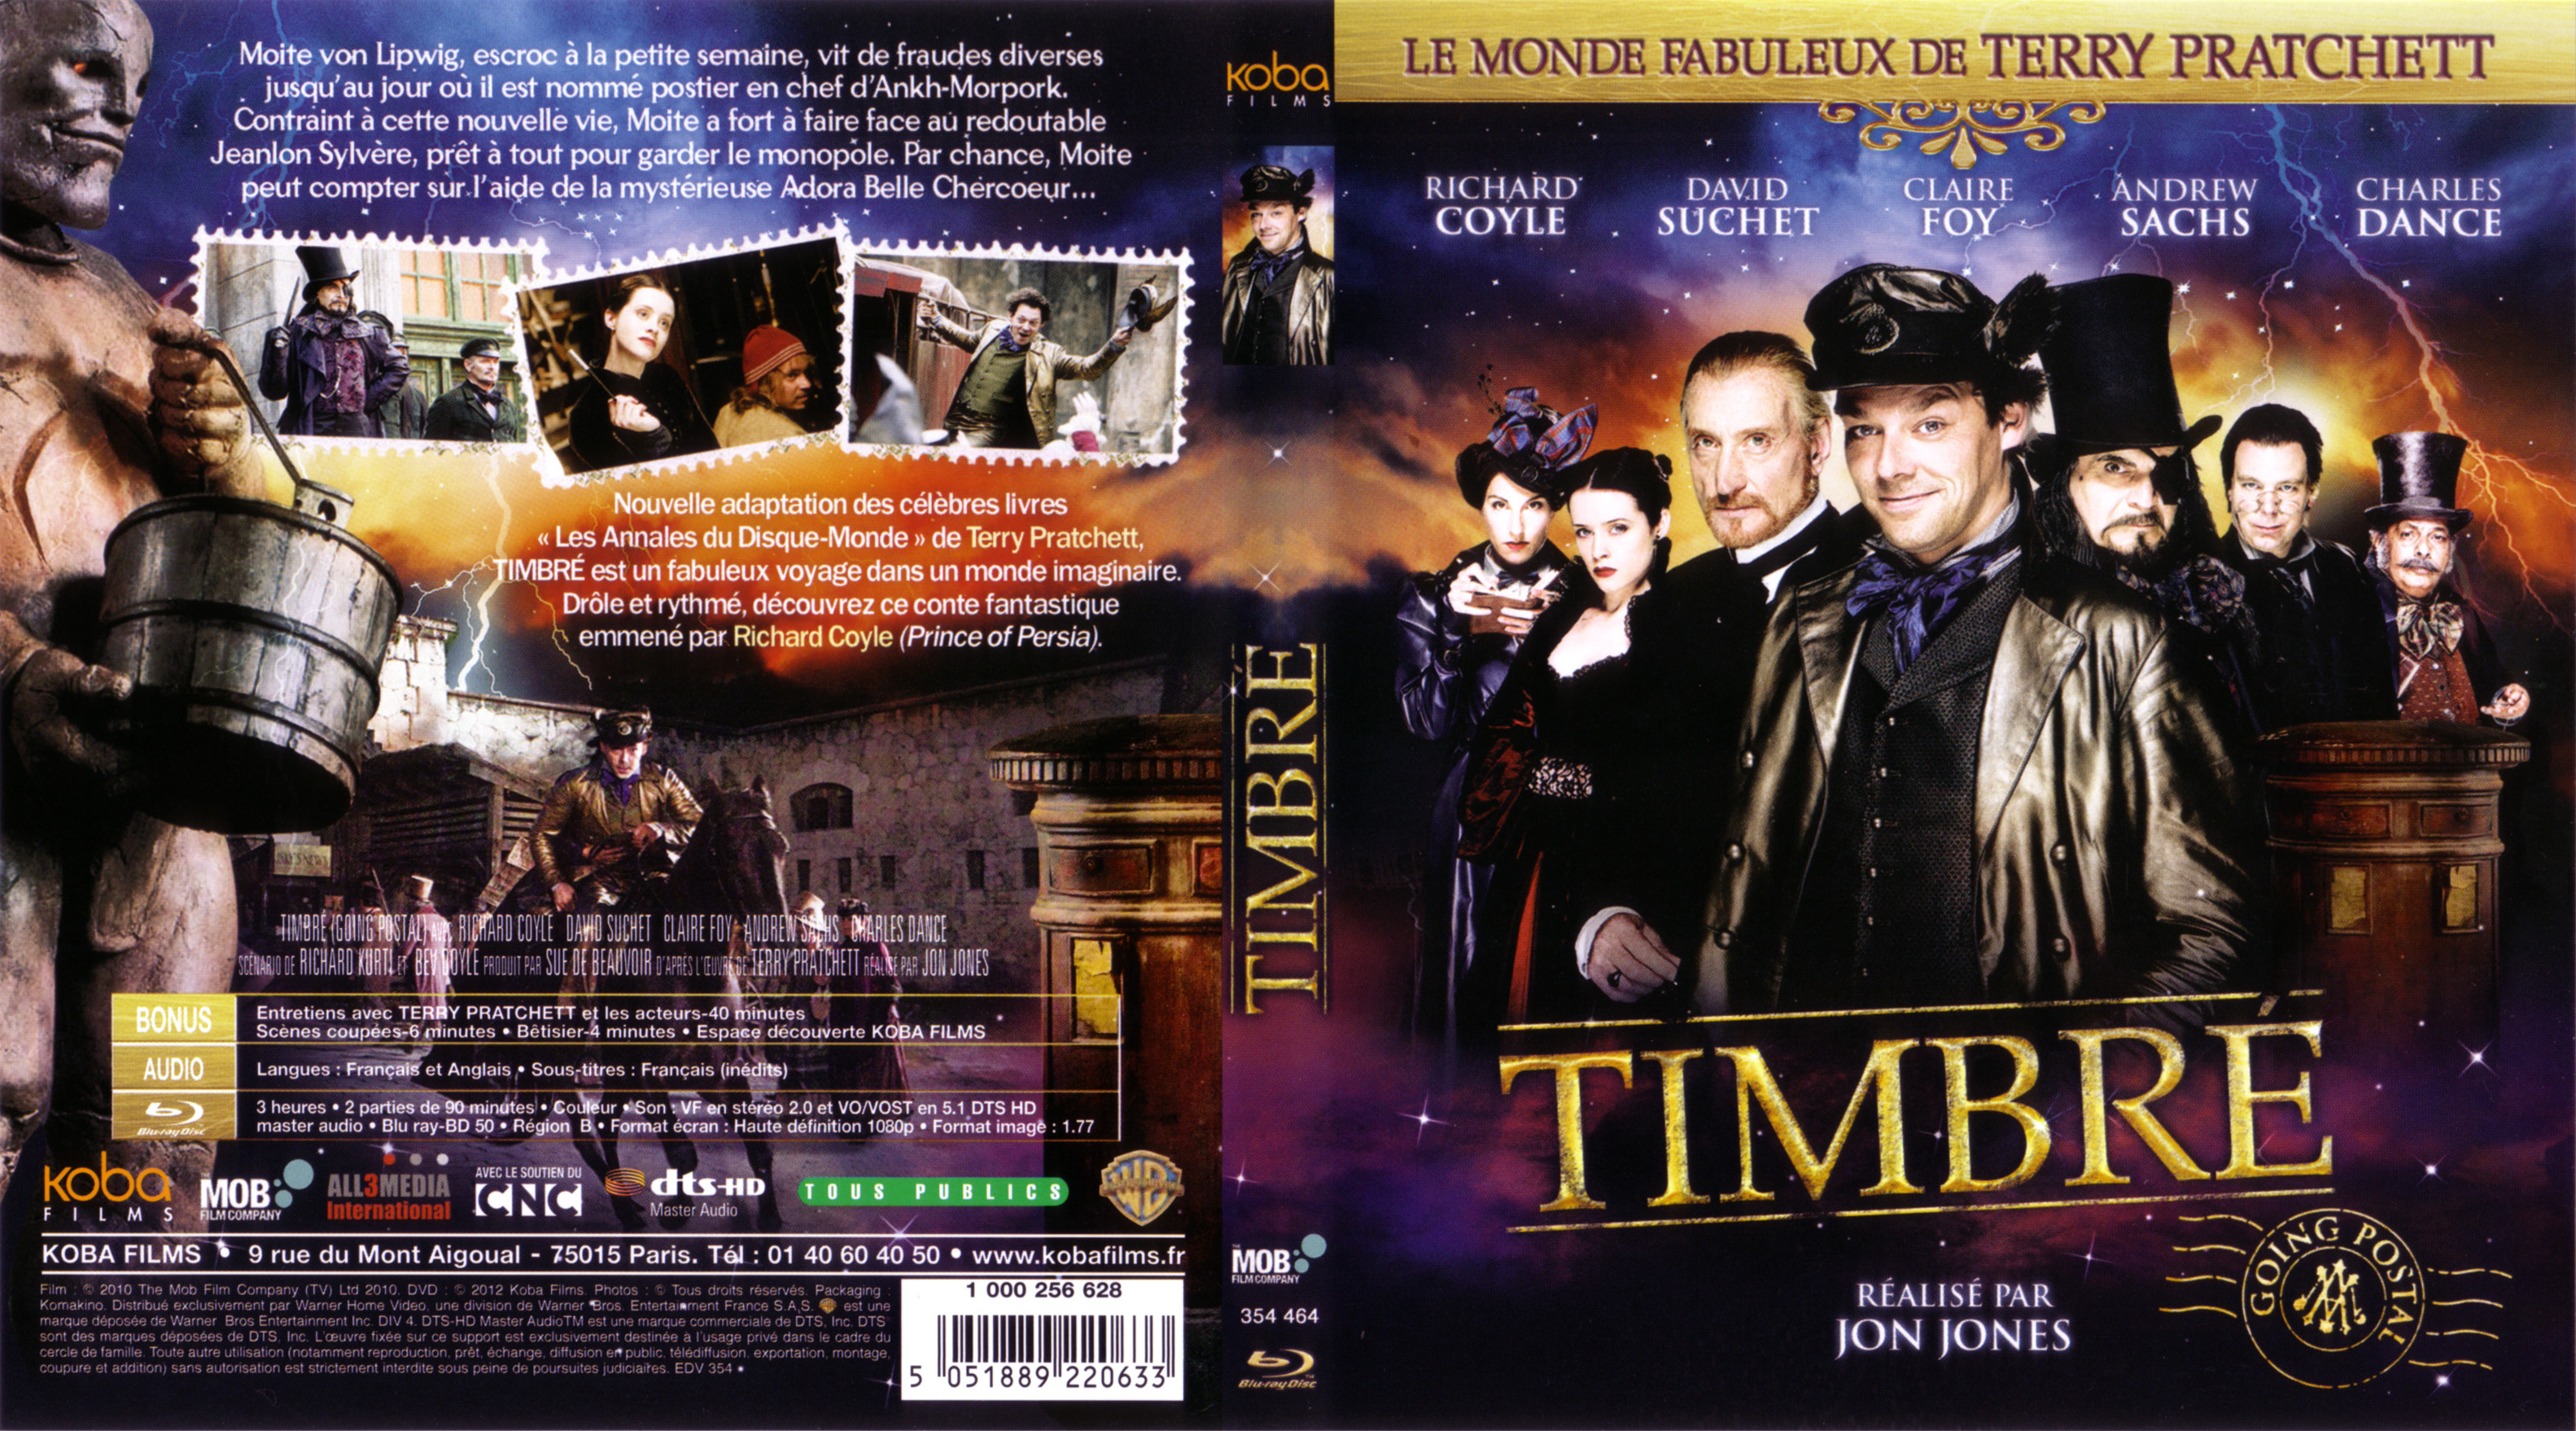 Jaquette DVD Timbr (BLU-RAY)